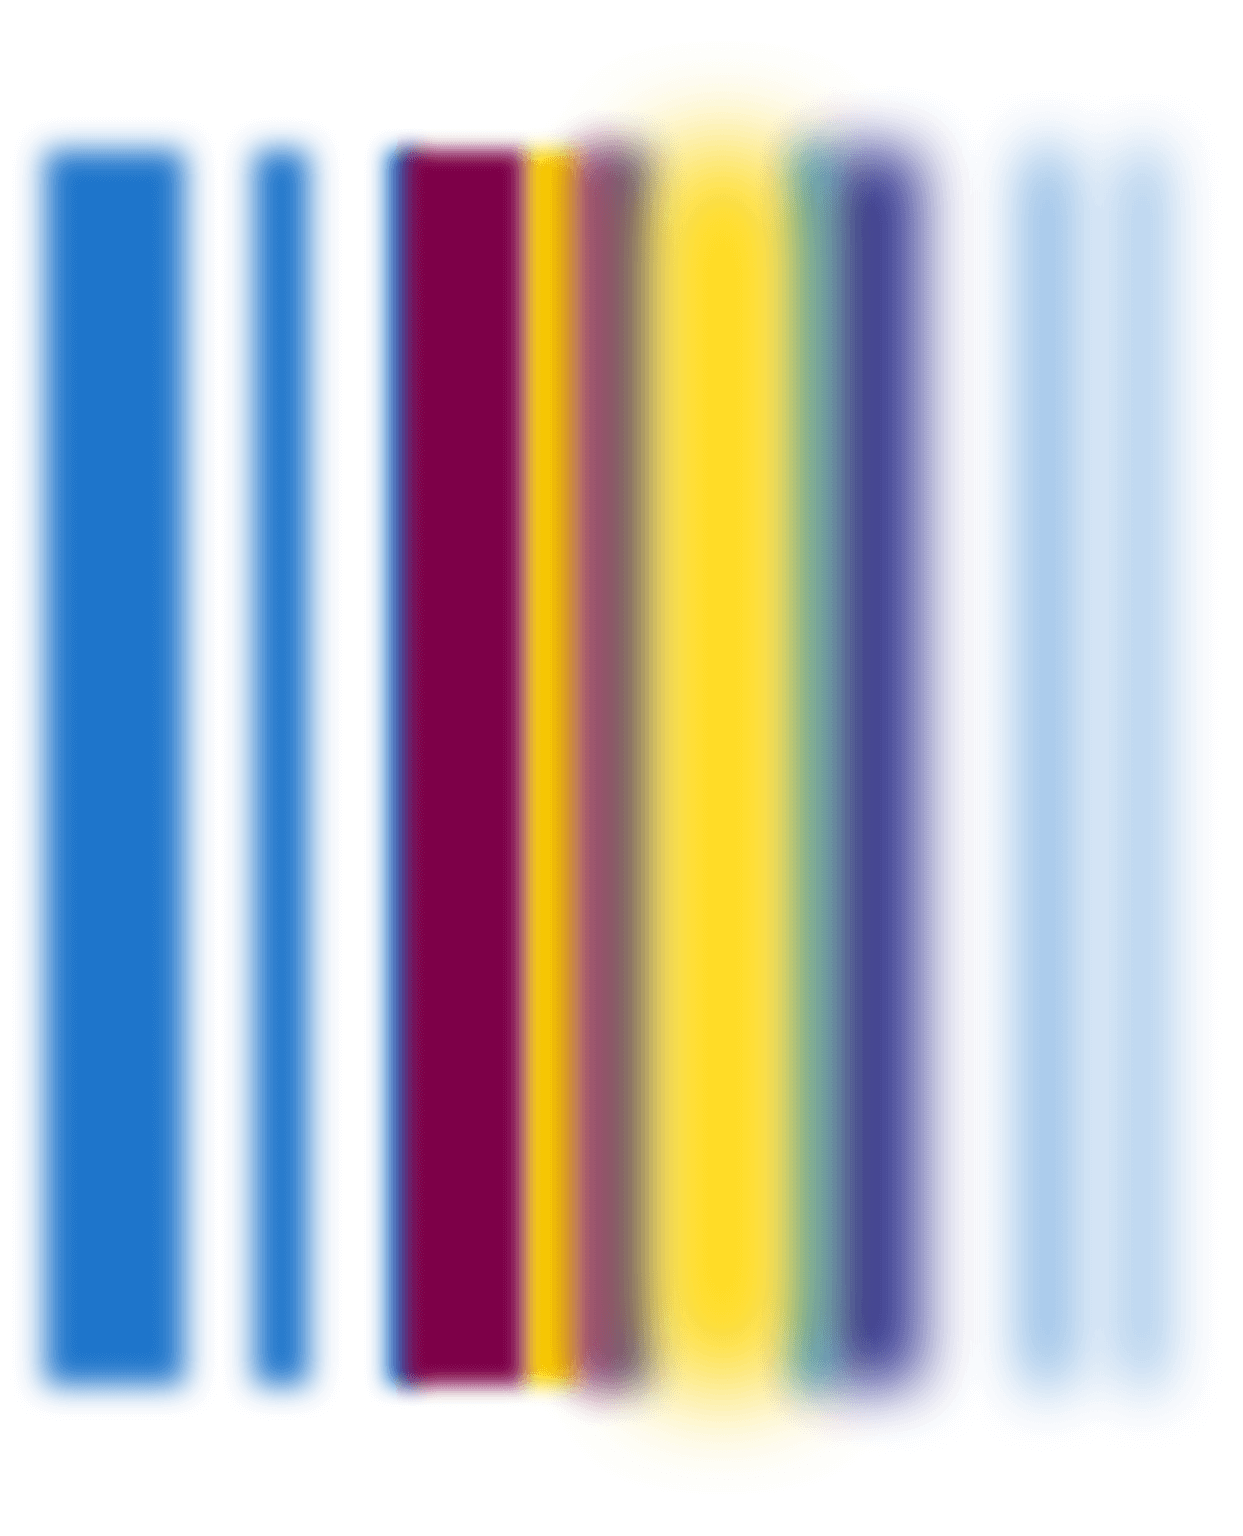 An image of a striped cylinder.